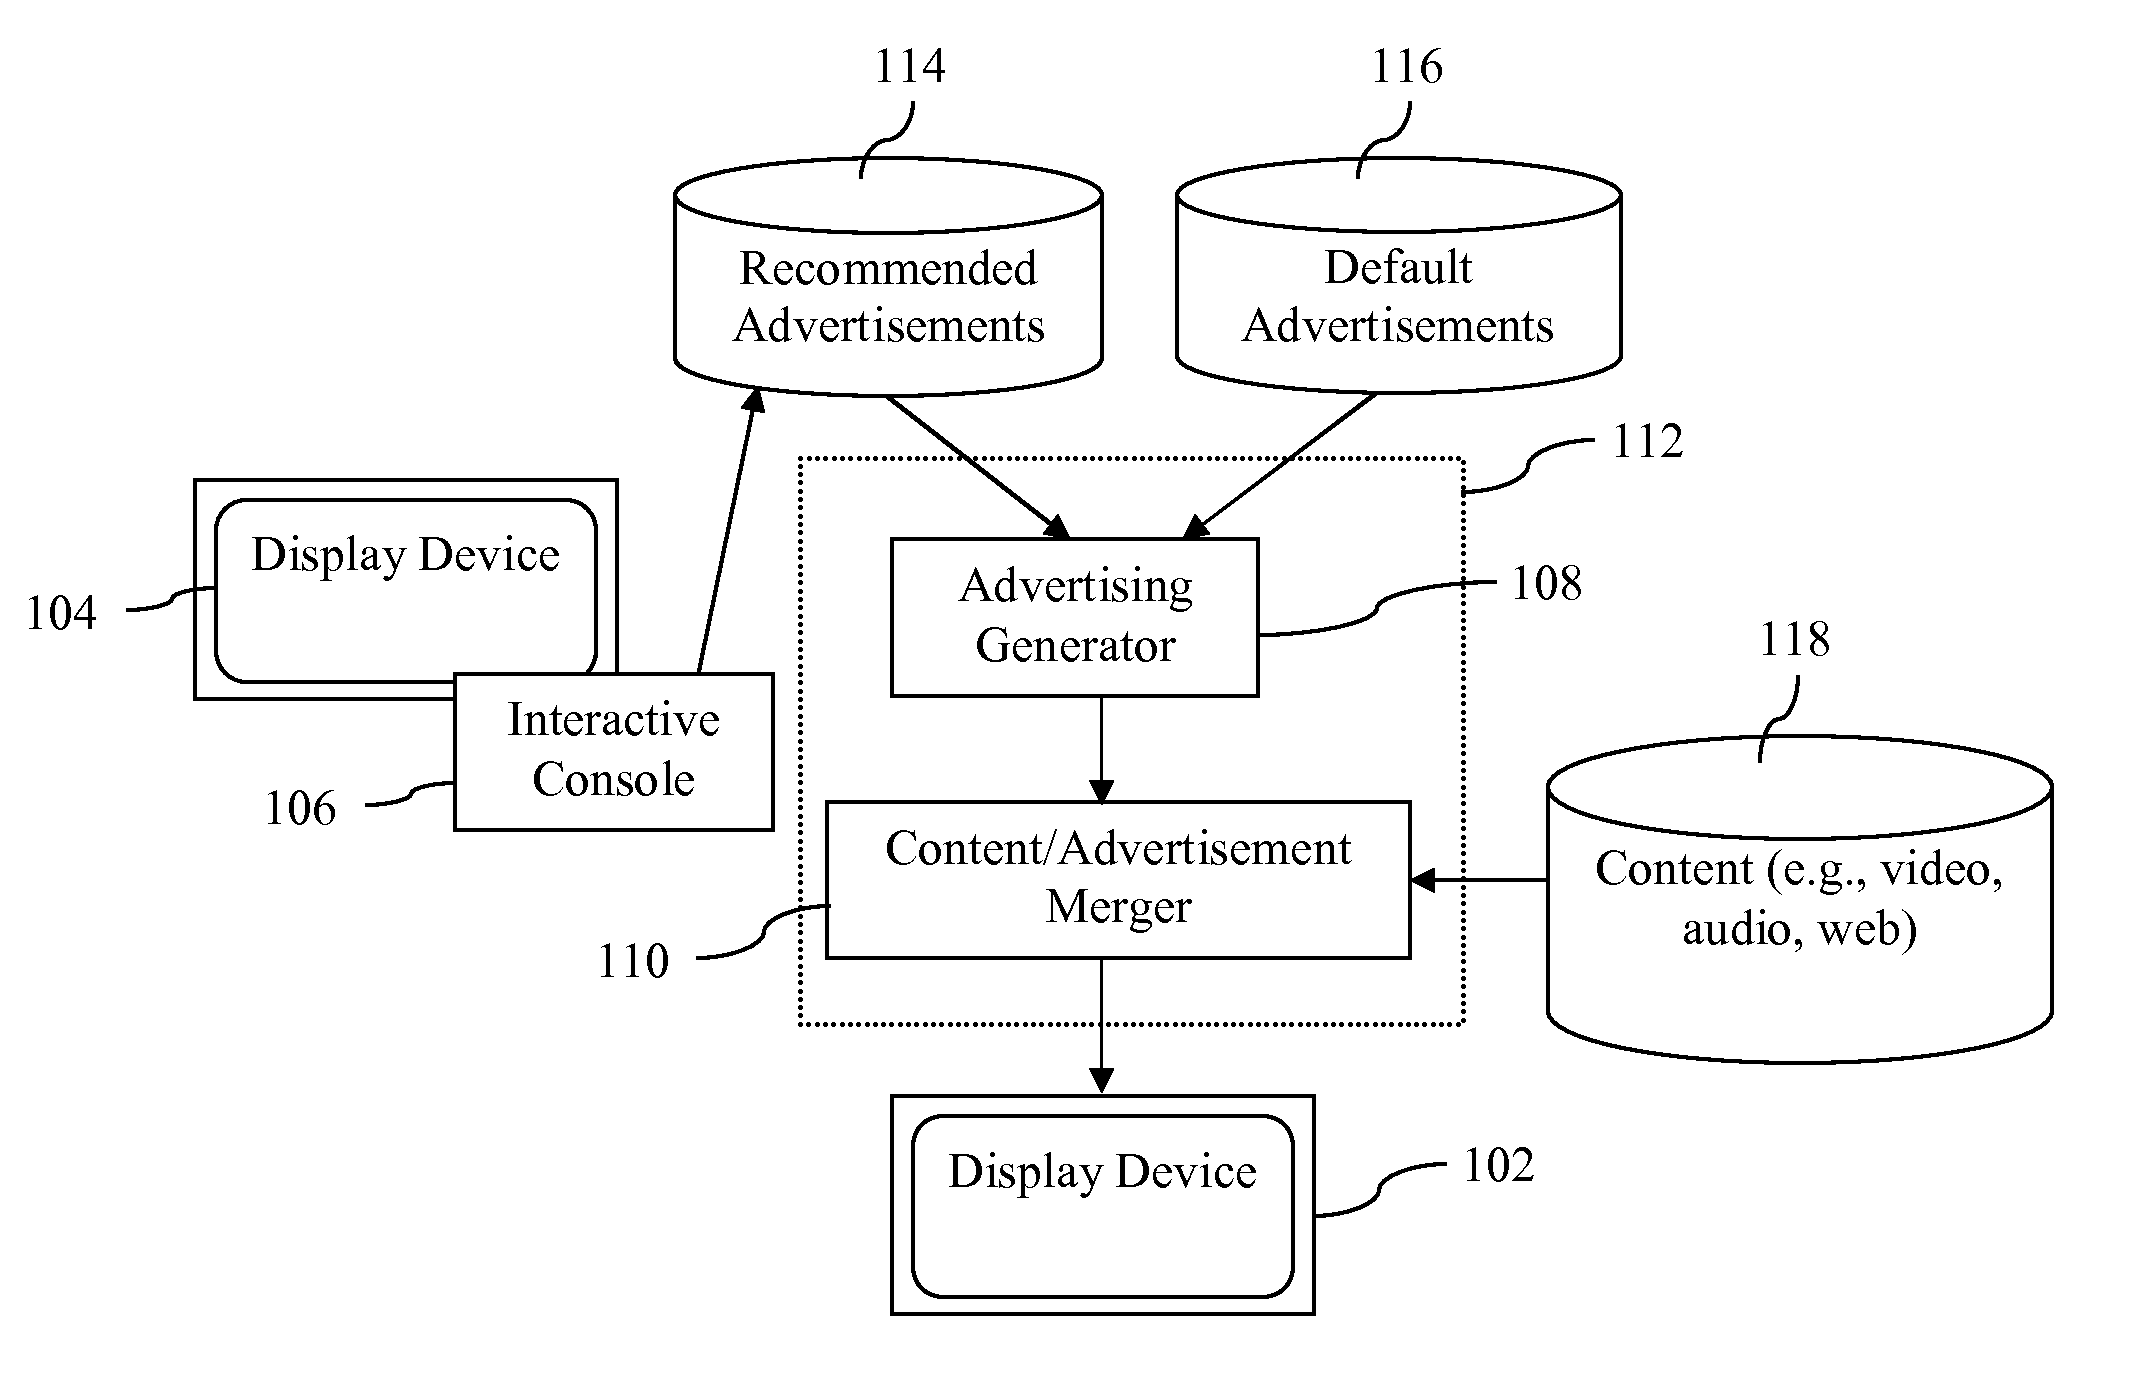 Annotated advertisement referral system and methods